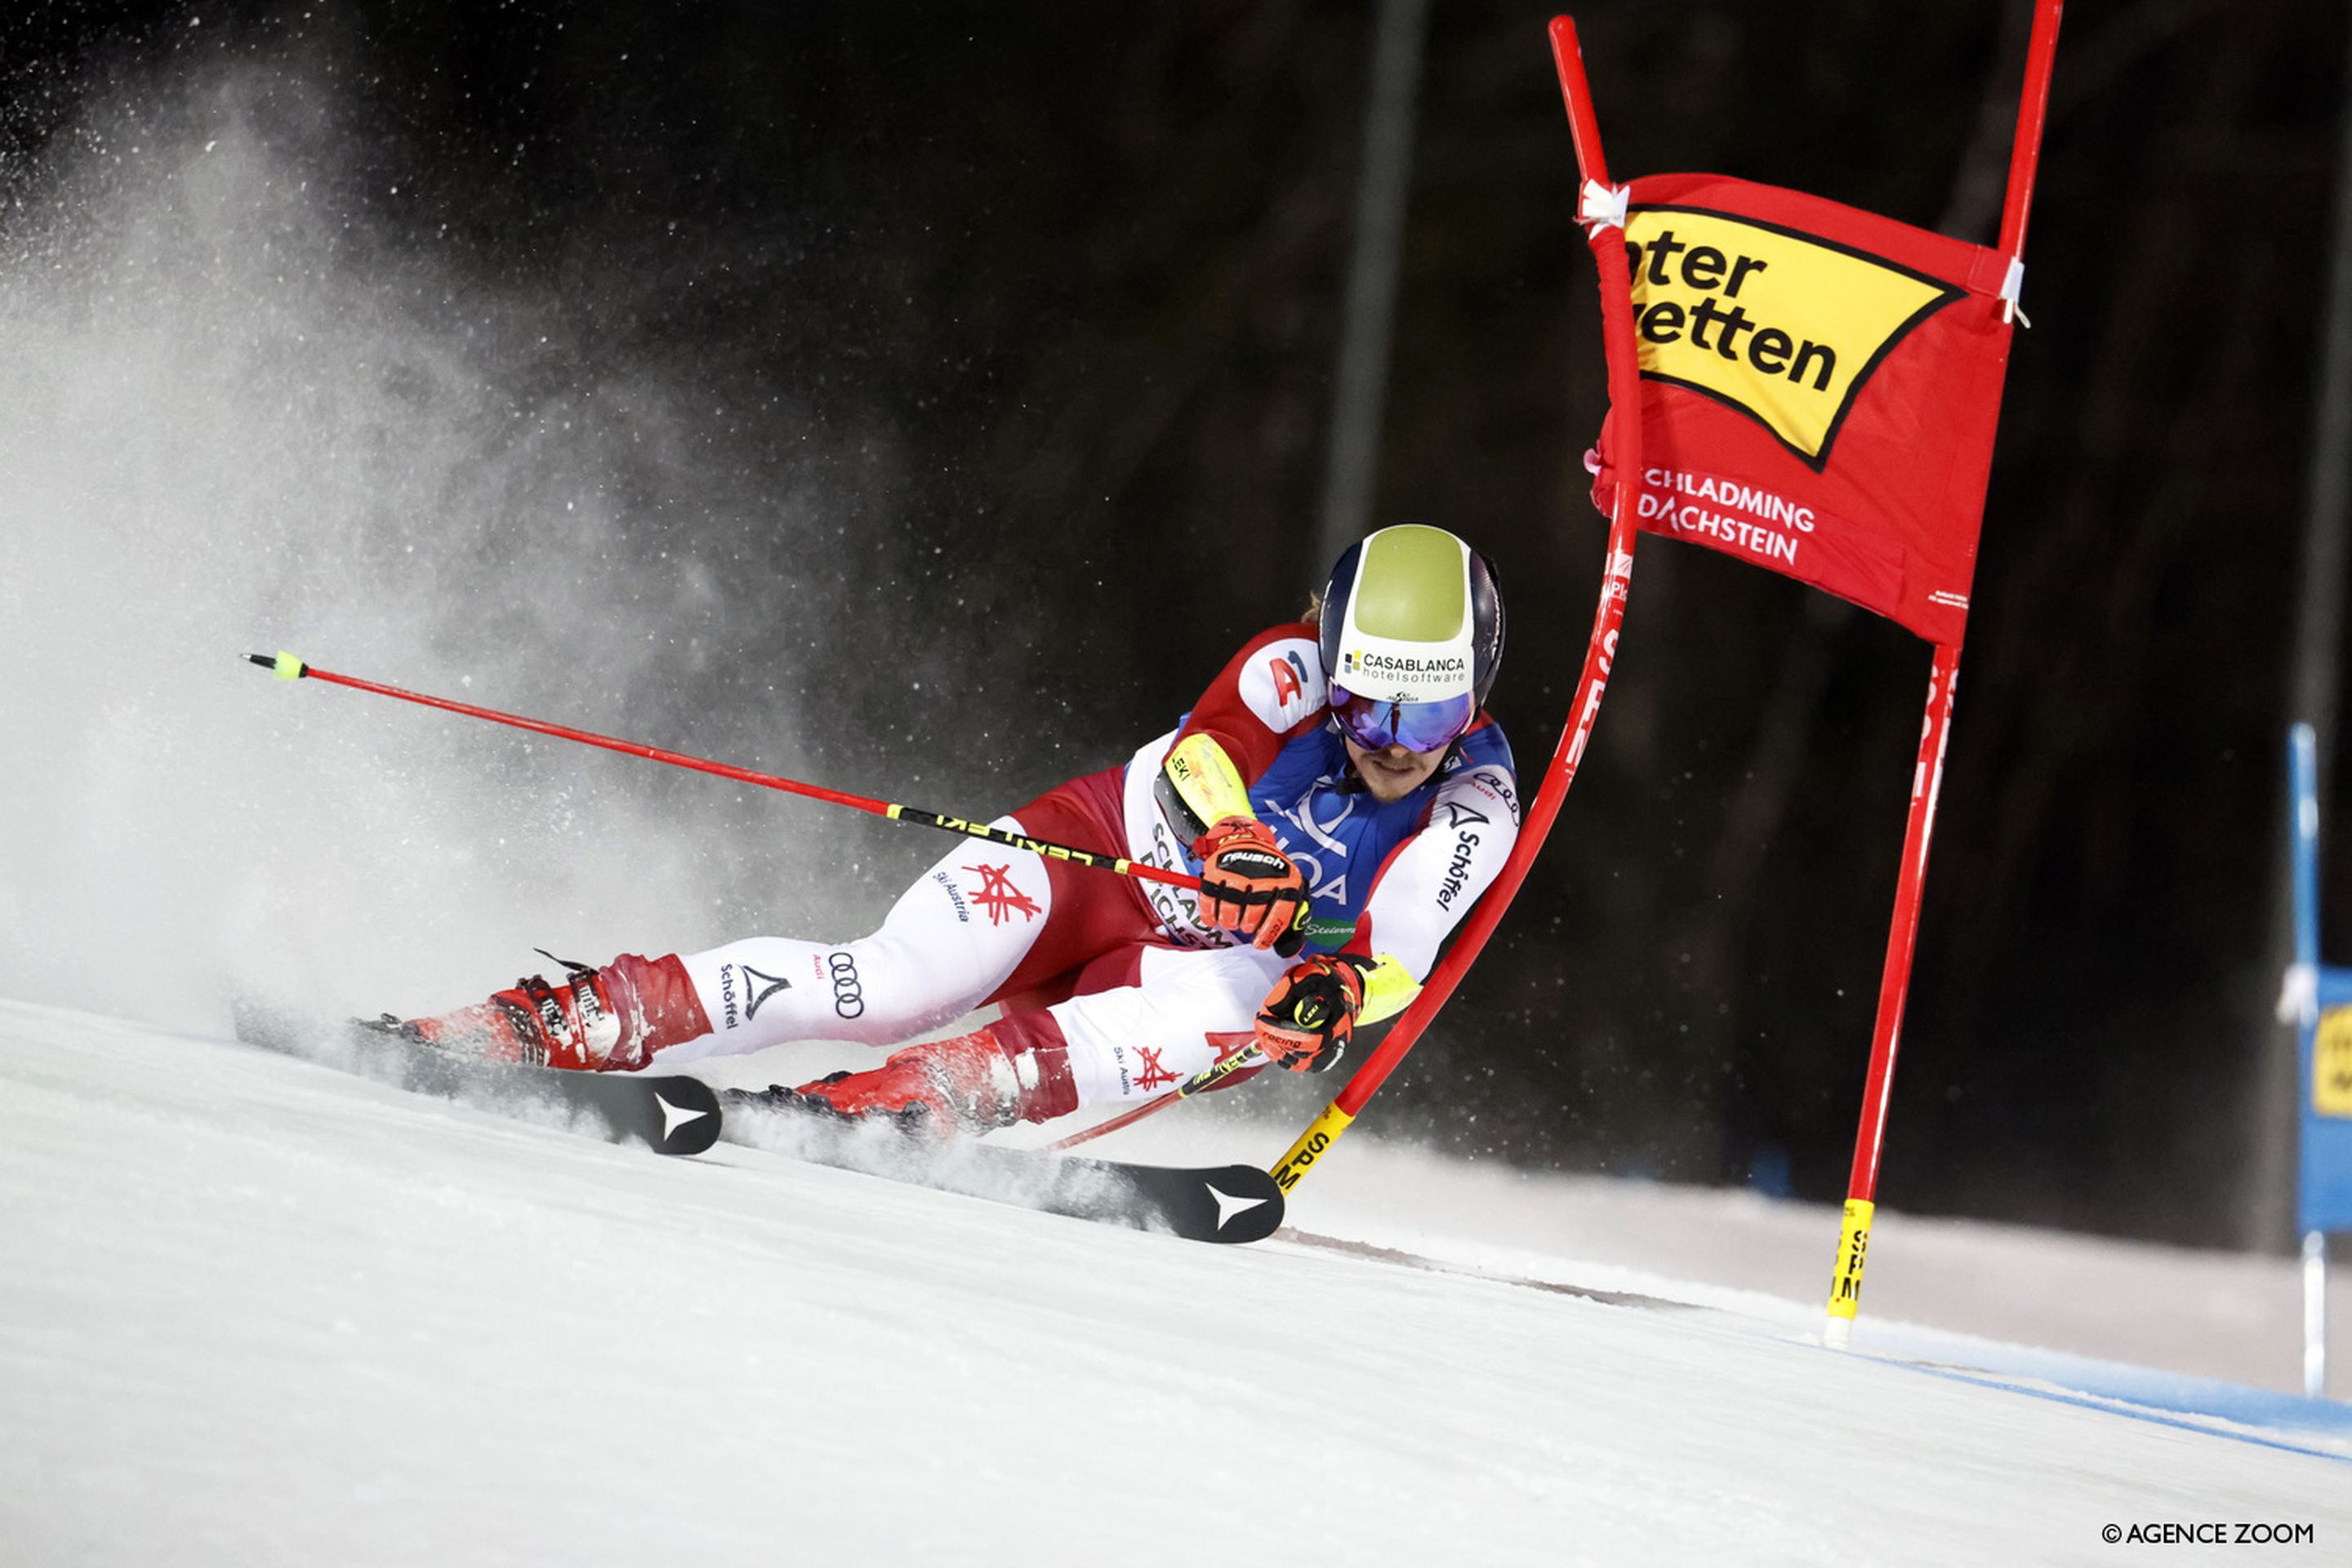 Feller attacks the course en route to an equal career-best result in giant slalom (Agence Zoom)